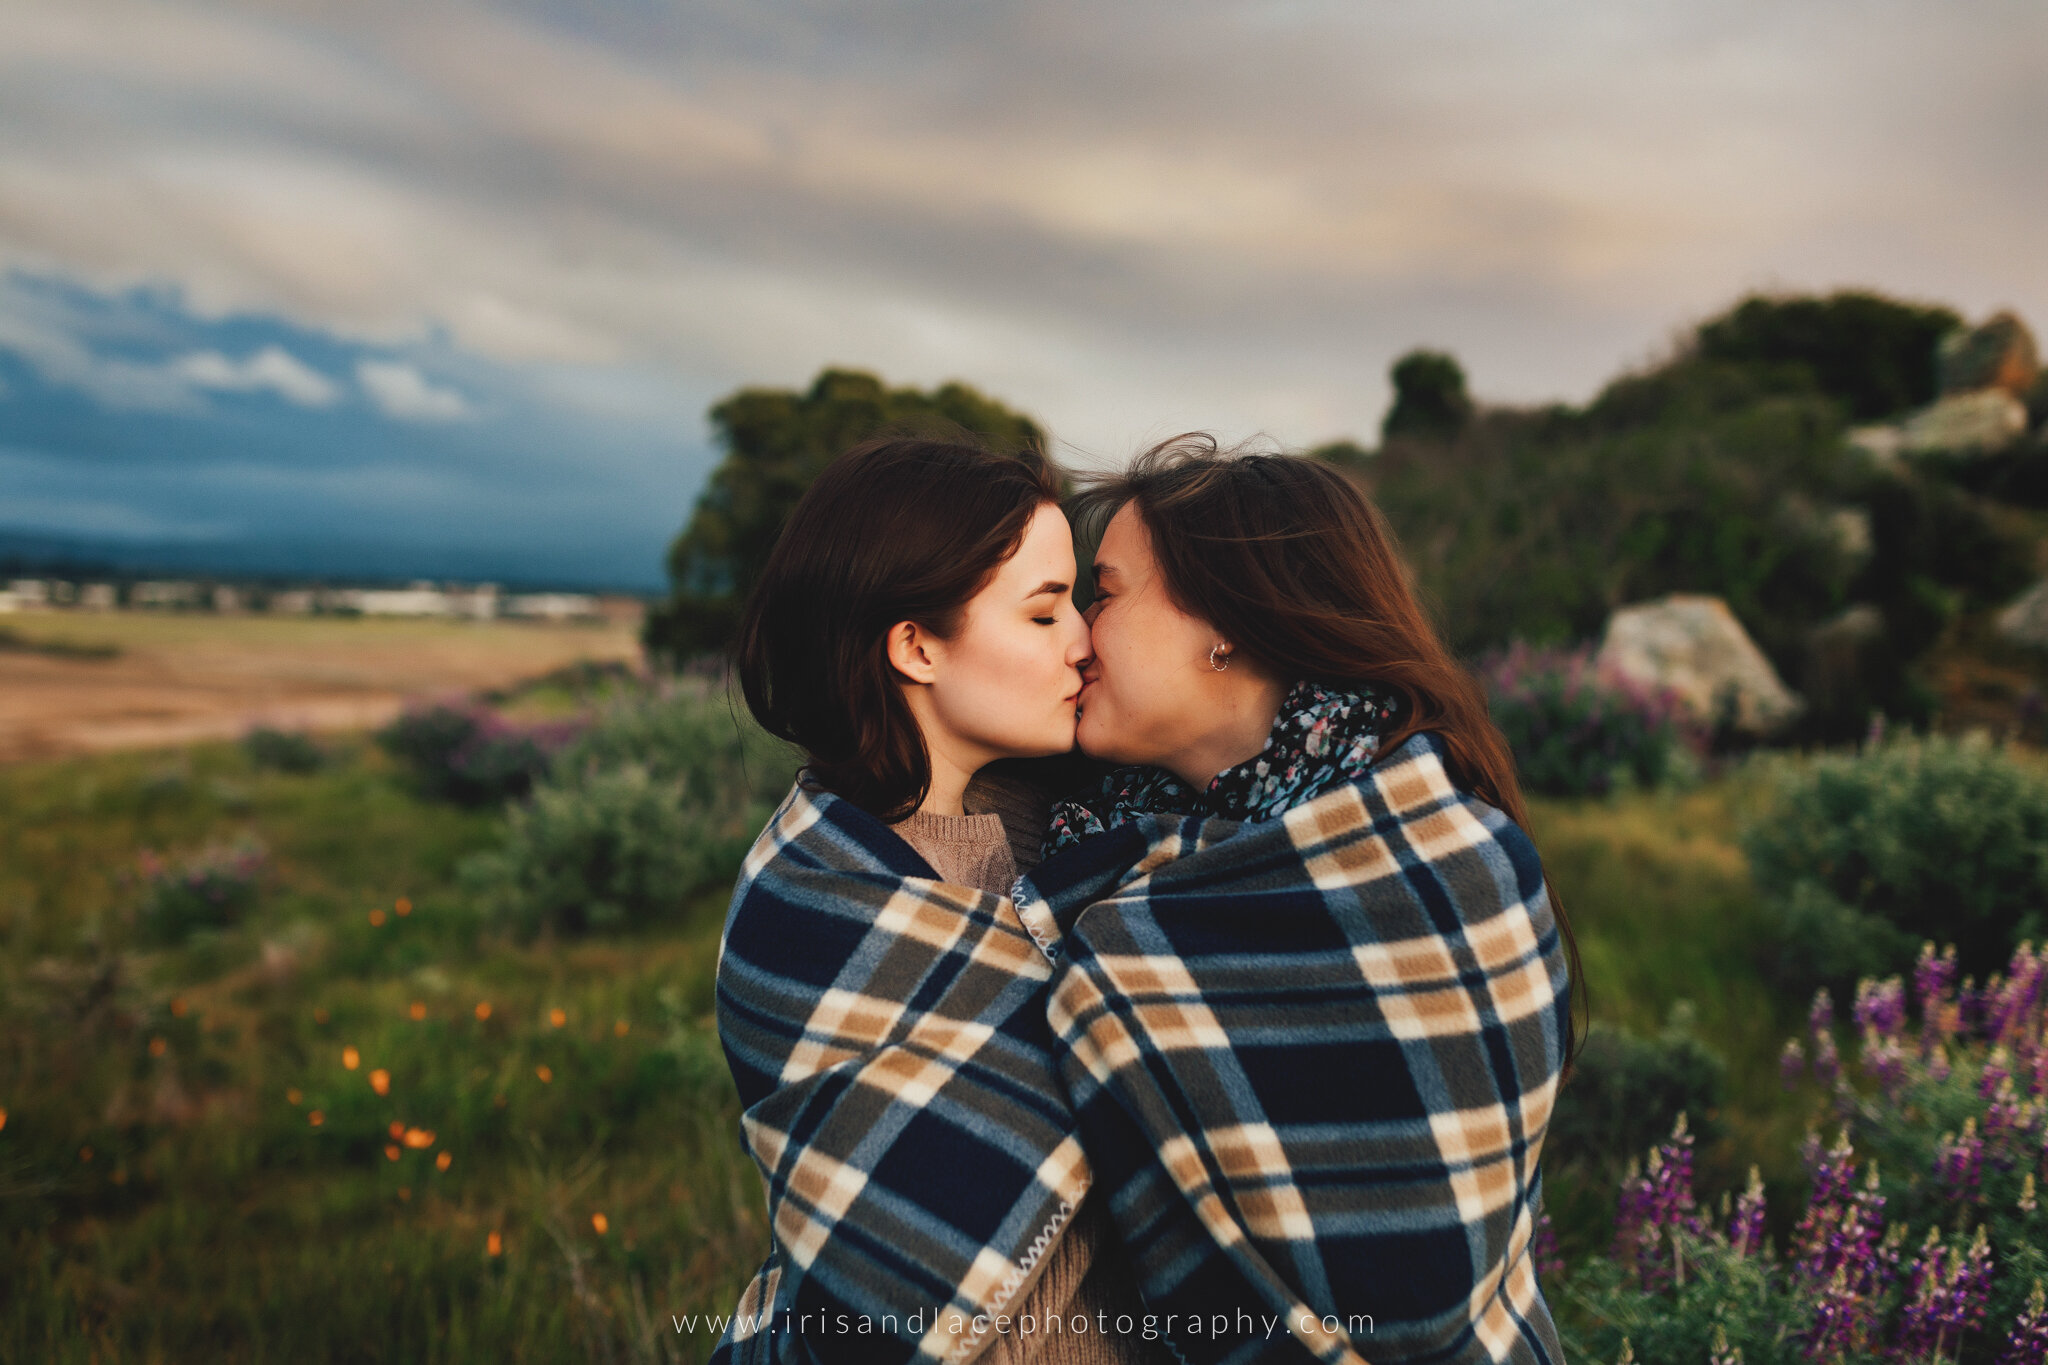 Same Sex Pose Ideas for Engagement Photos   |  Iris and Lace Photography   |   SF Bay Area Couples Photographer